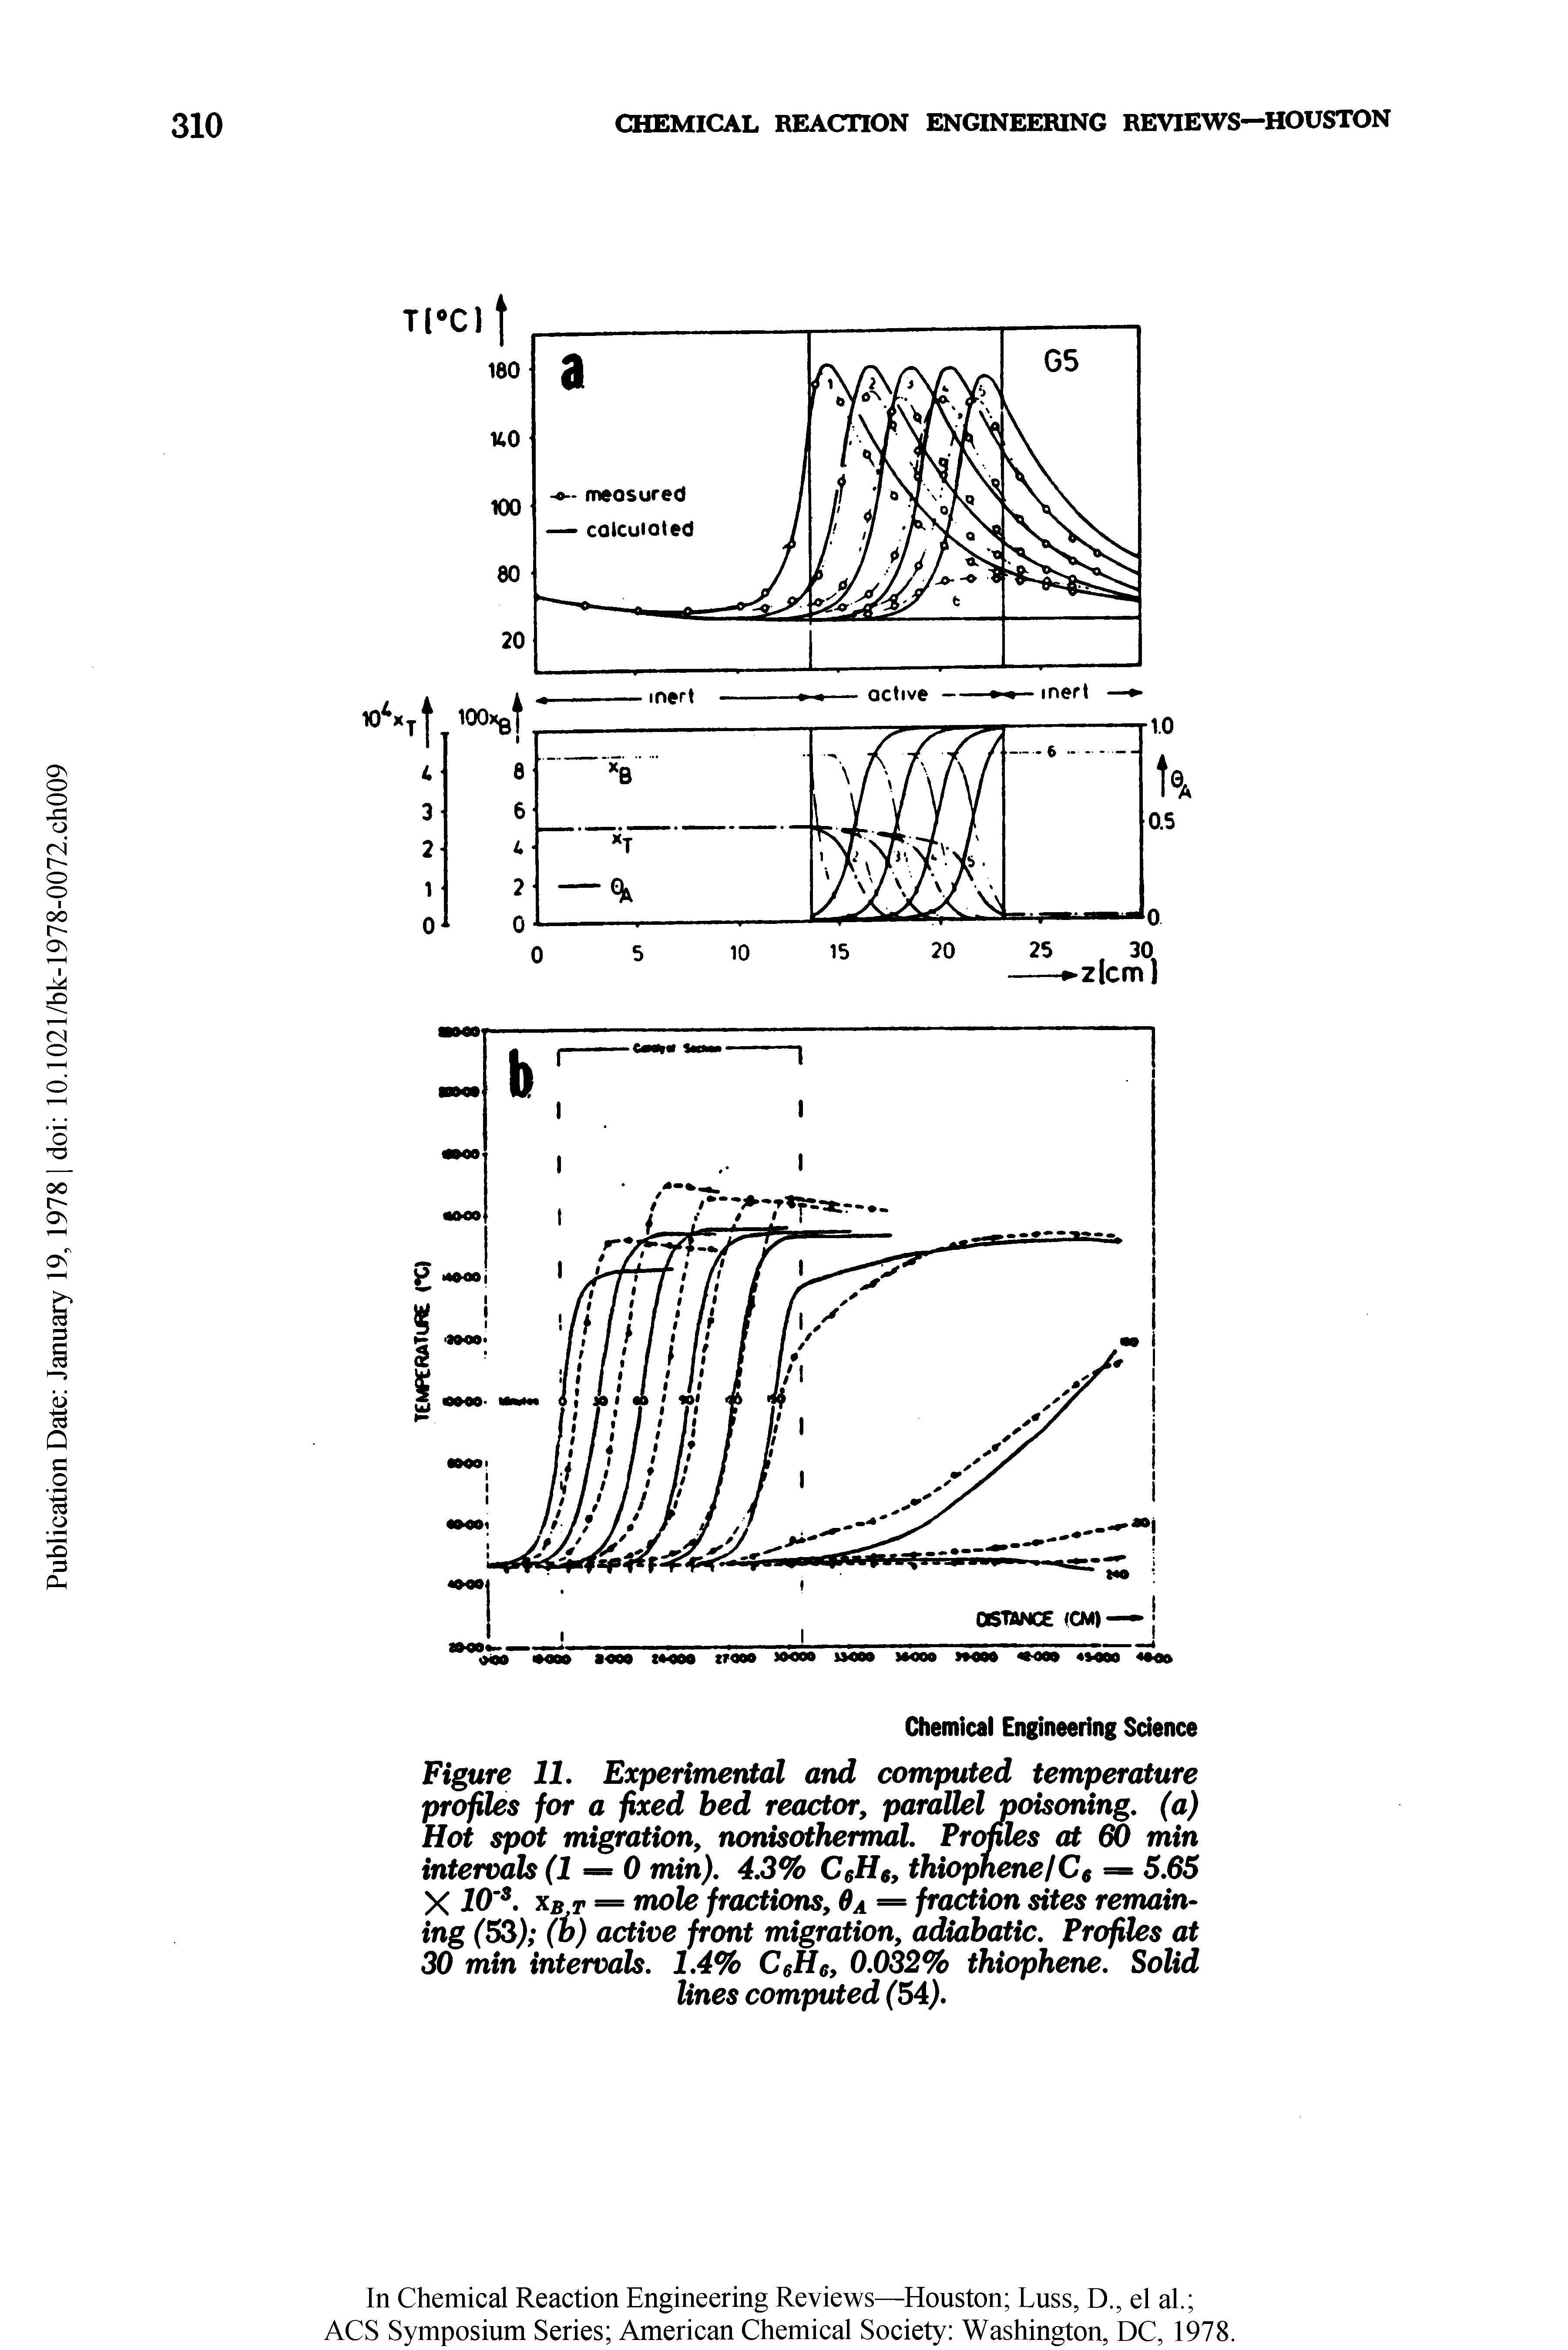 Figure 11, Experimental and computed temperature profiles for a fixed bed reactor parallel poisoning, (a) Hot spot migration, nonisothermal. Profiles at min intervals (1 = 0 min), 4,3% CeHg, ihiopnenelC =- 5.05 X iO. xb,t = fractions, Ba = fraction sites remaining (53) (b) active front migration, adiabatic. Profiles at 30 min intervals. 1.4% CeHe, 0.032% thiophene. Solid lines computed (54).